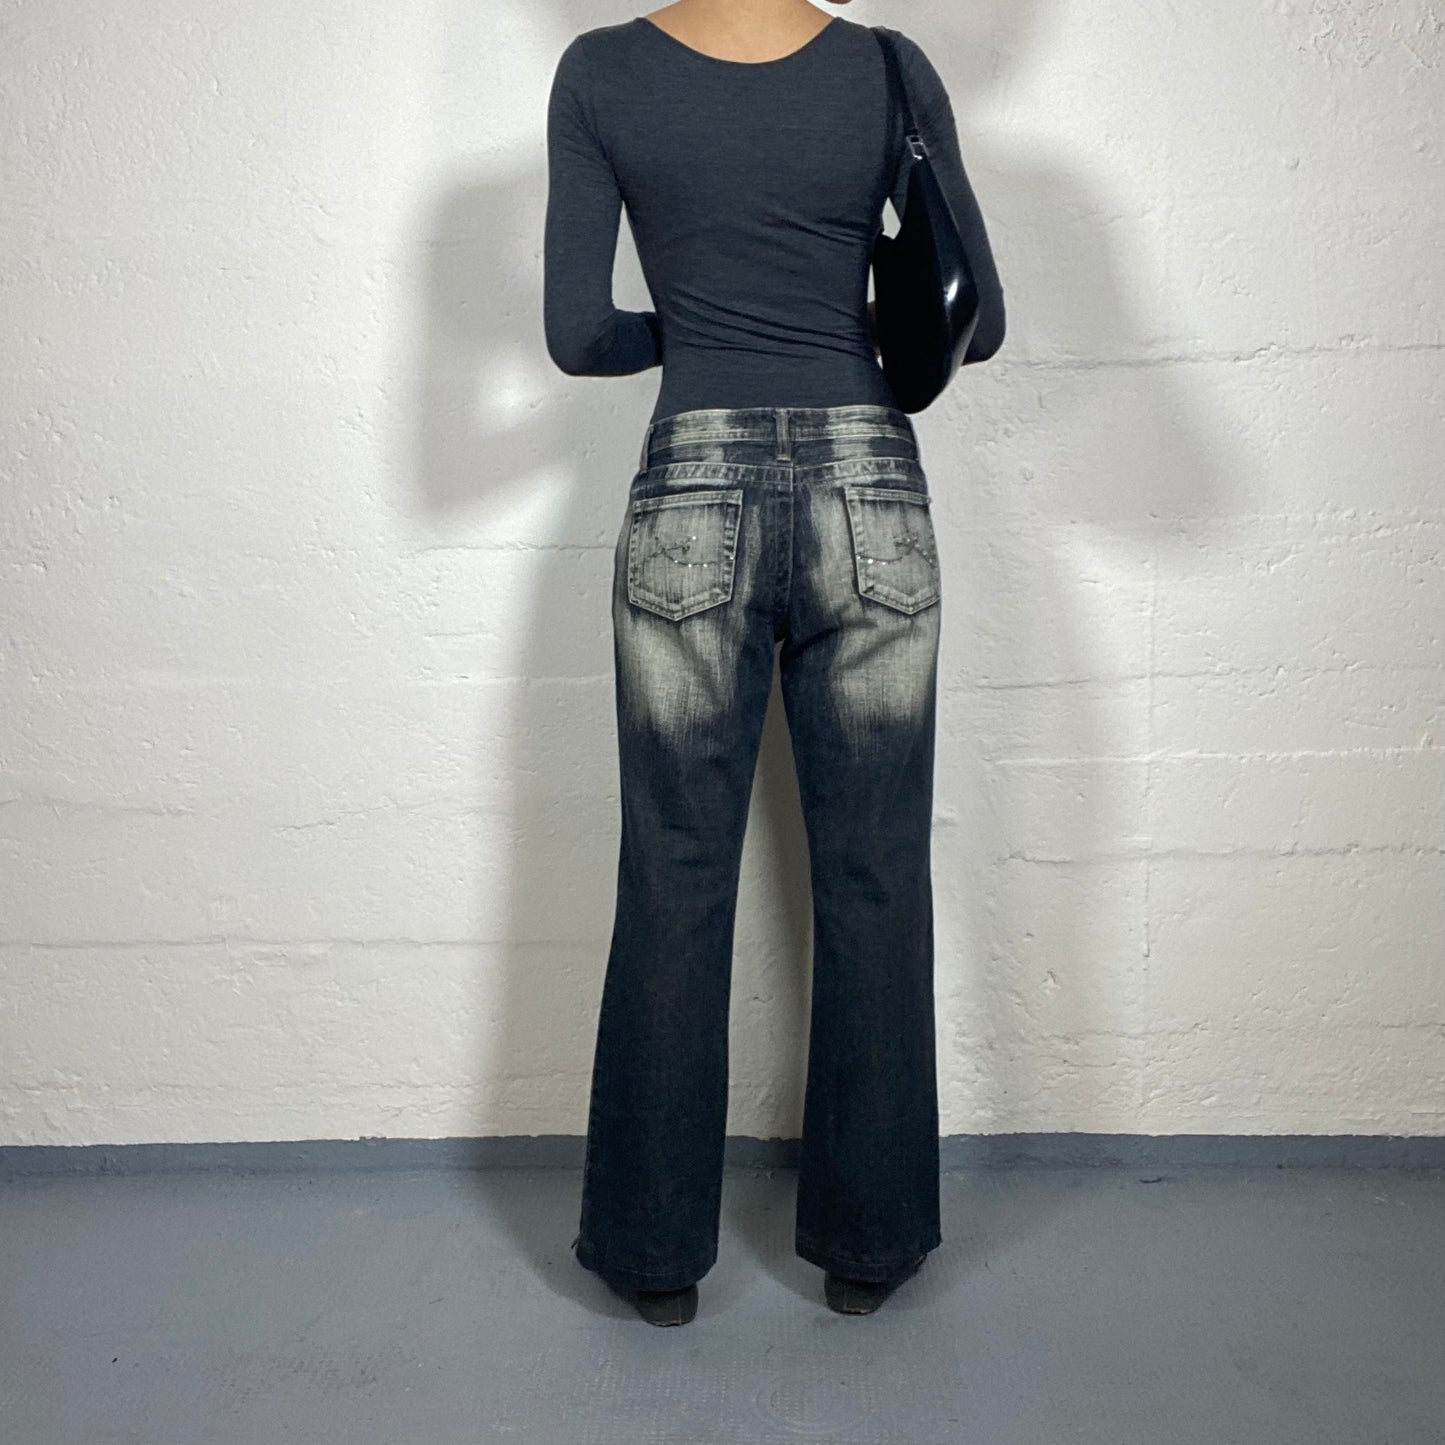 Vintage 2000's Glamorous Black Bootcut Beige Wash Out Denim Jeans with Decorative Covered in Rhinestones Cuts (XL)